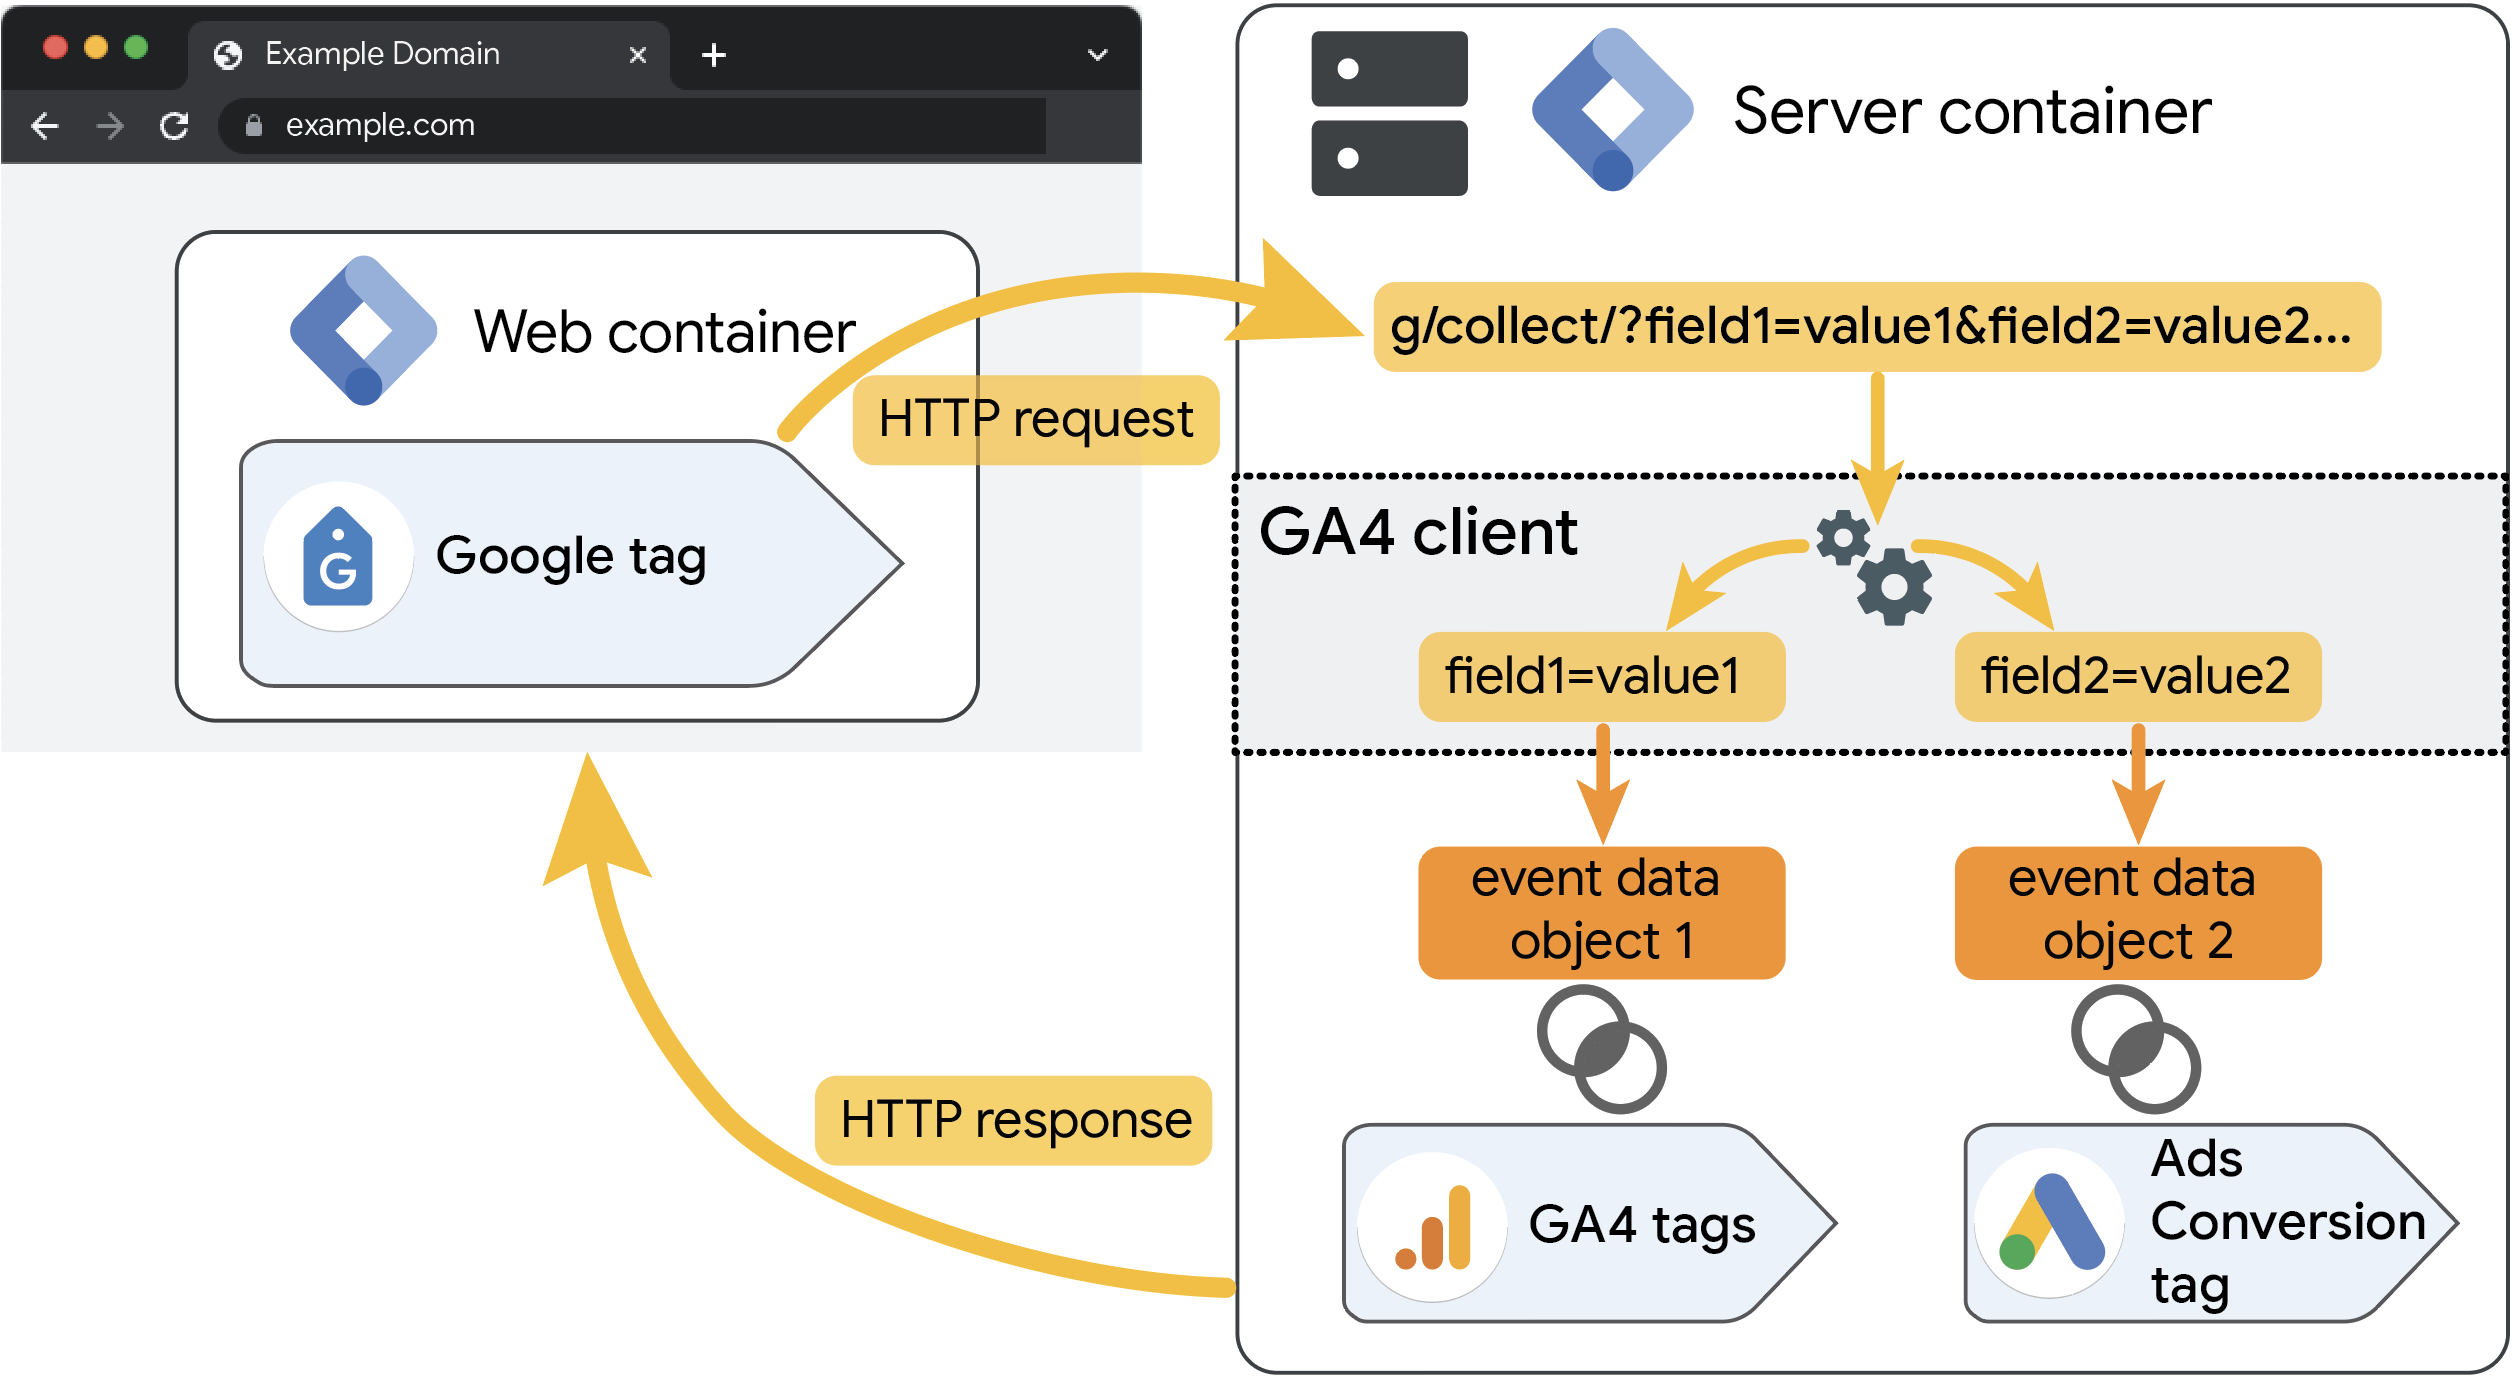 Diagram showing how the GA 4 client and the web container interact